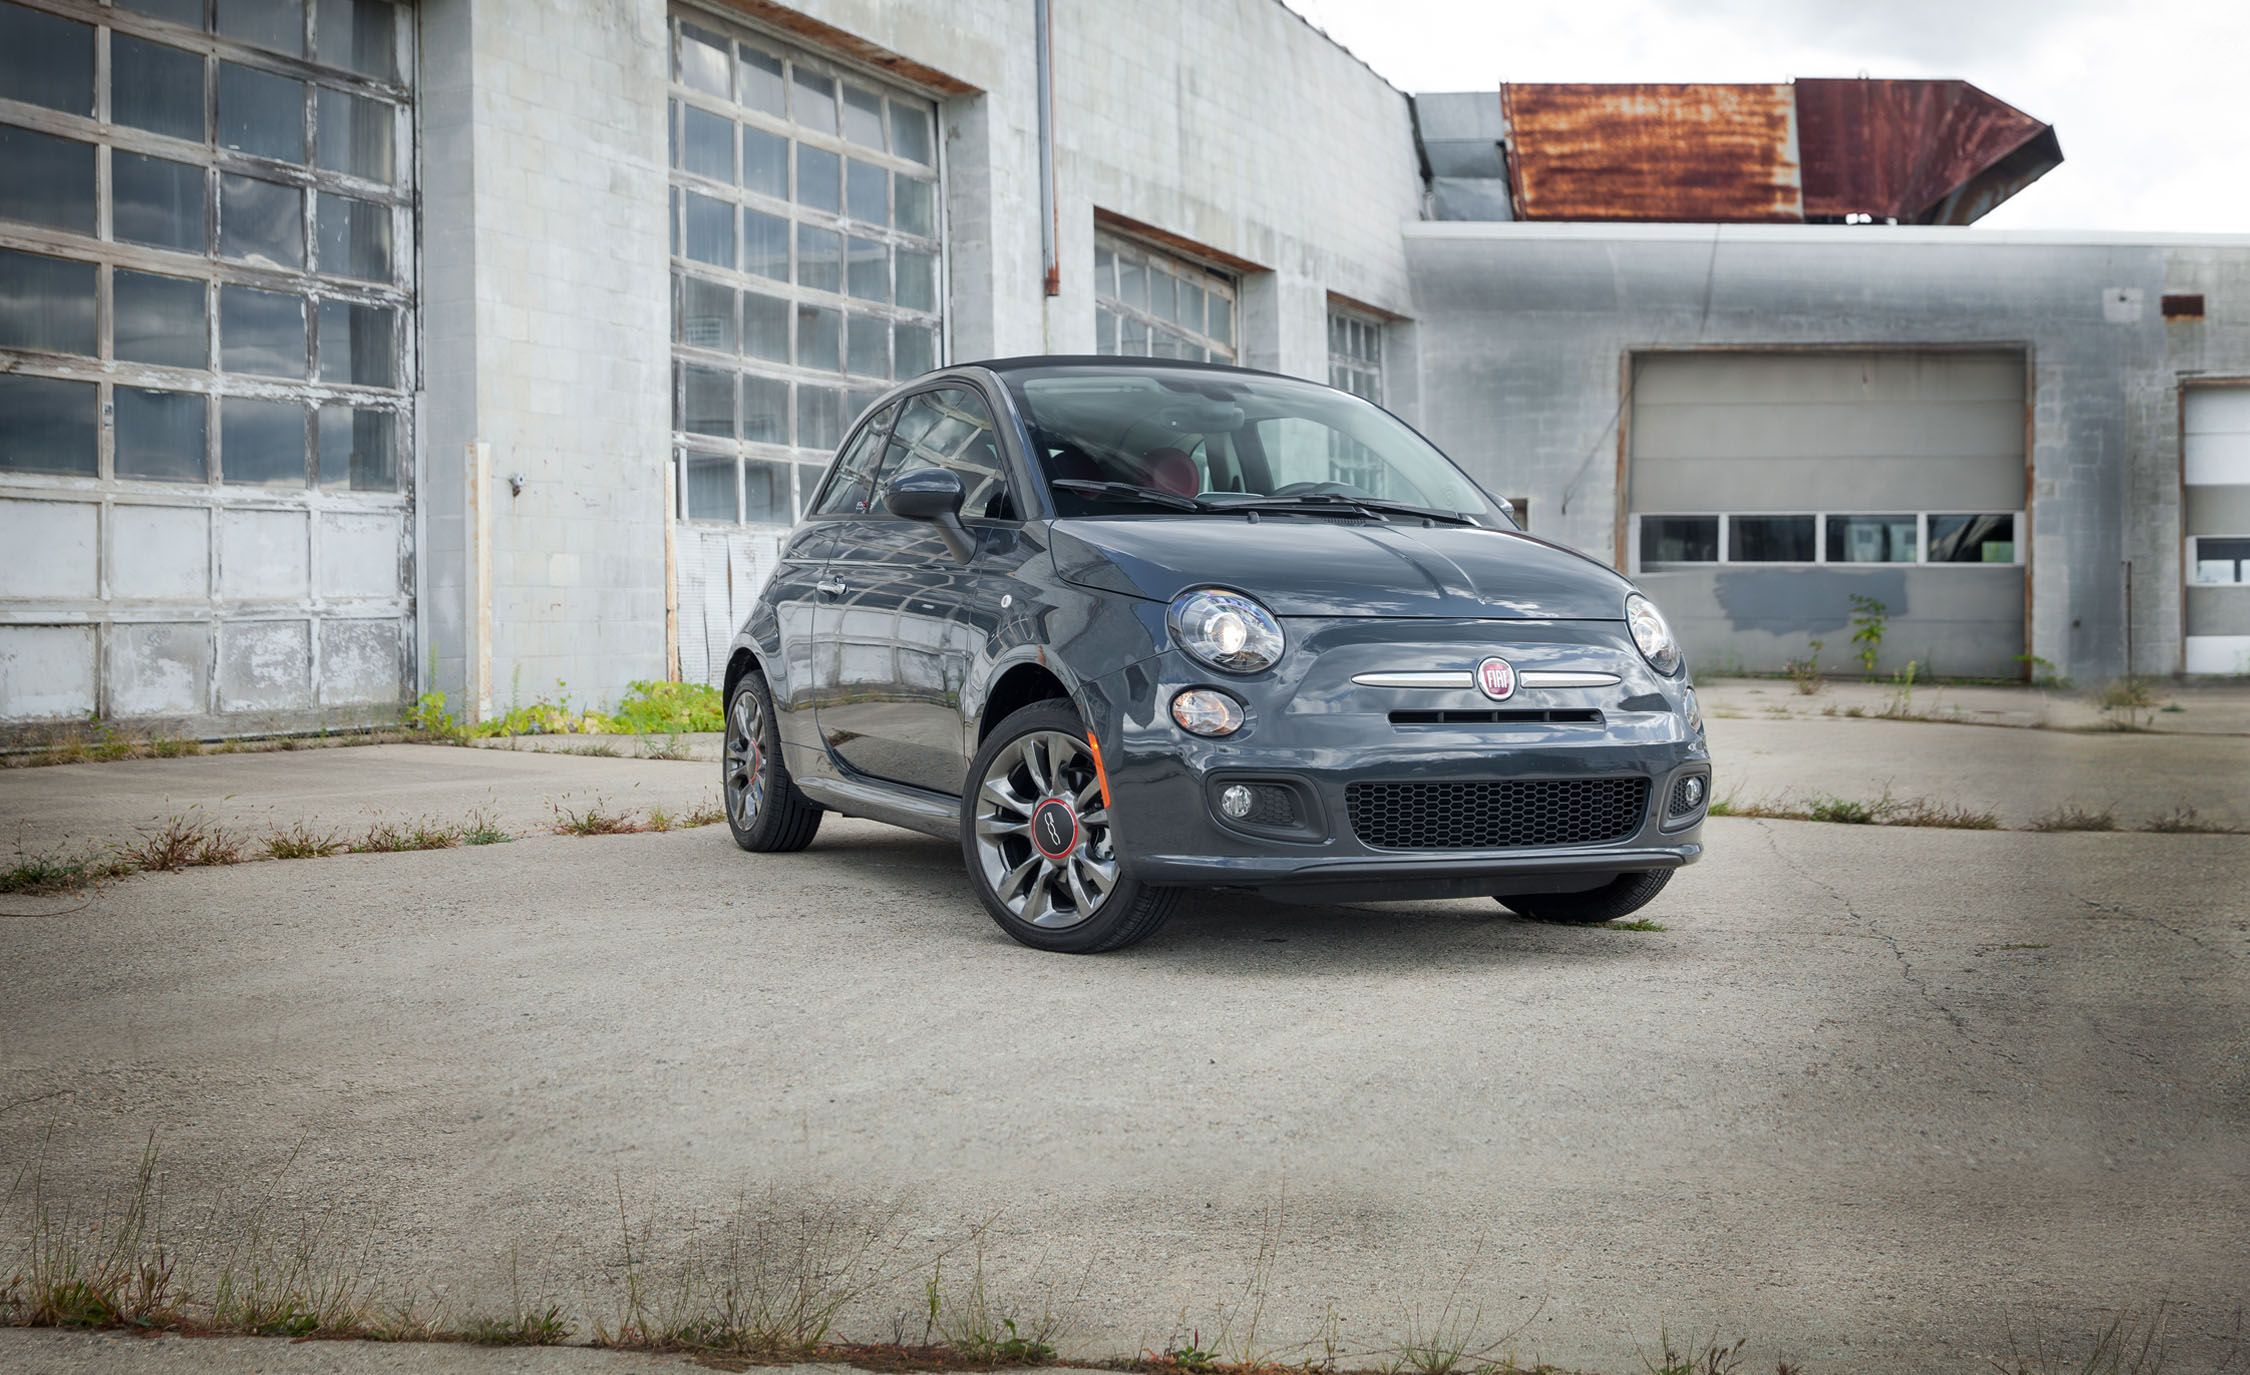 2018 Fiat 500 Review, Pricing, and Specs